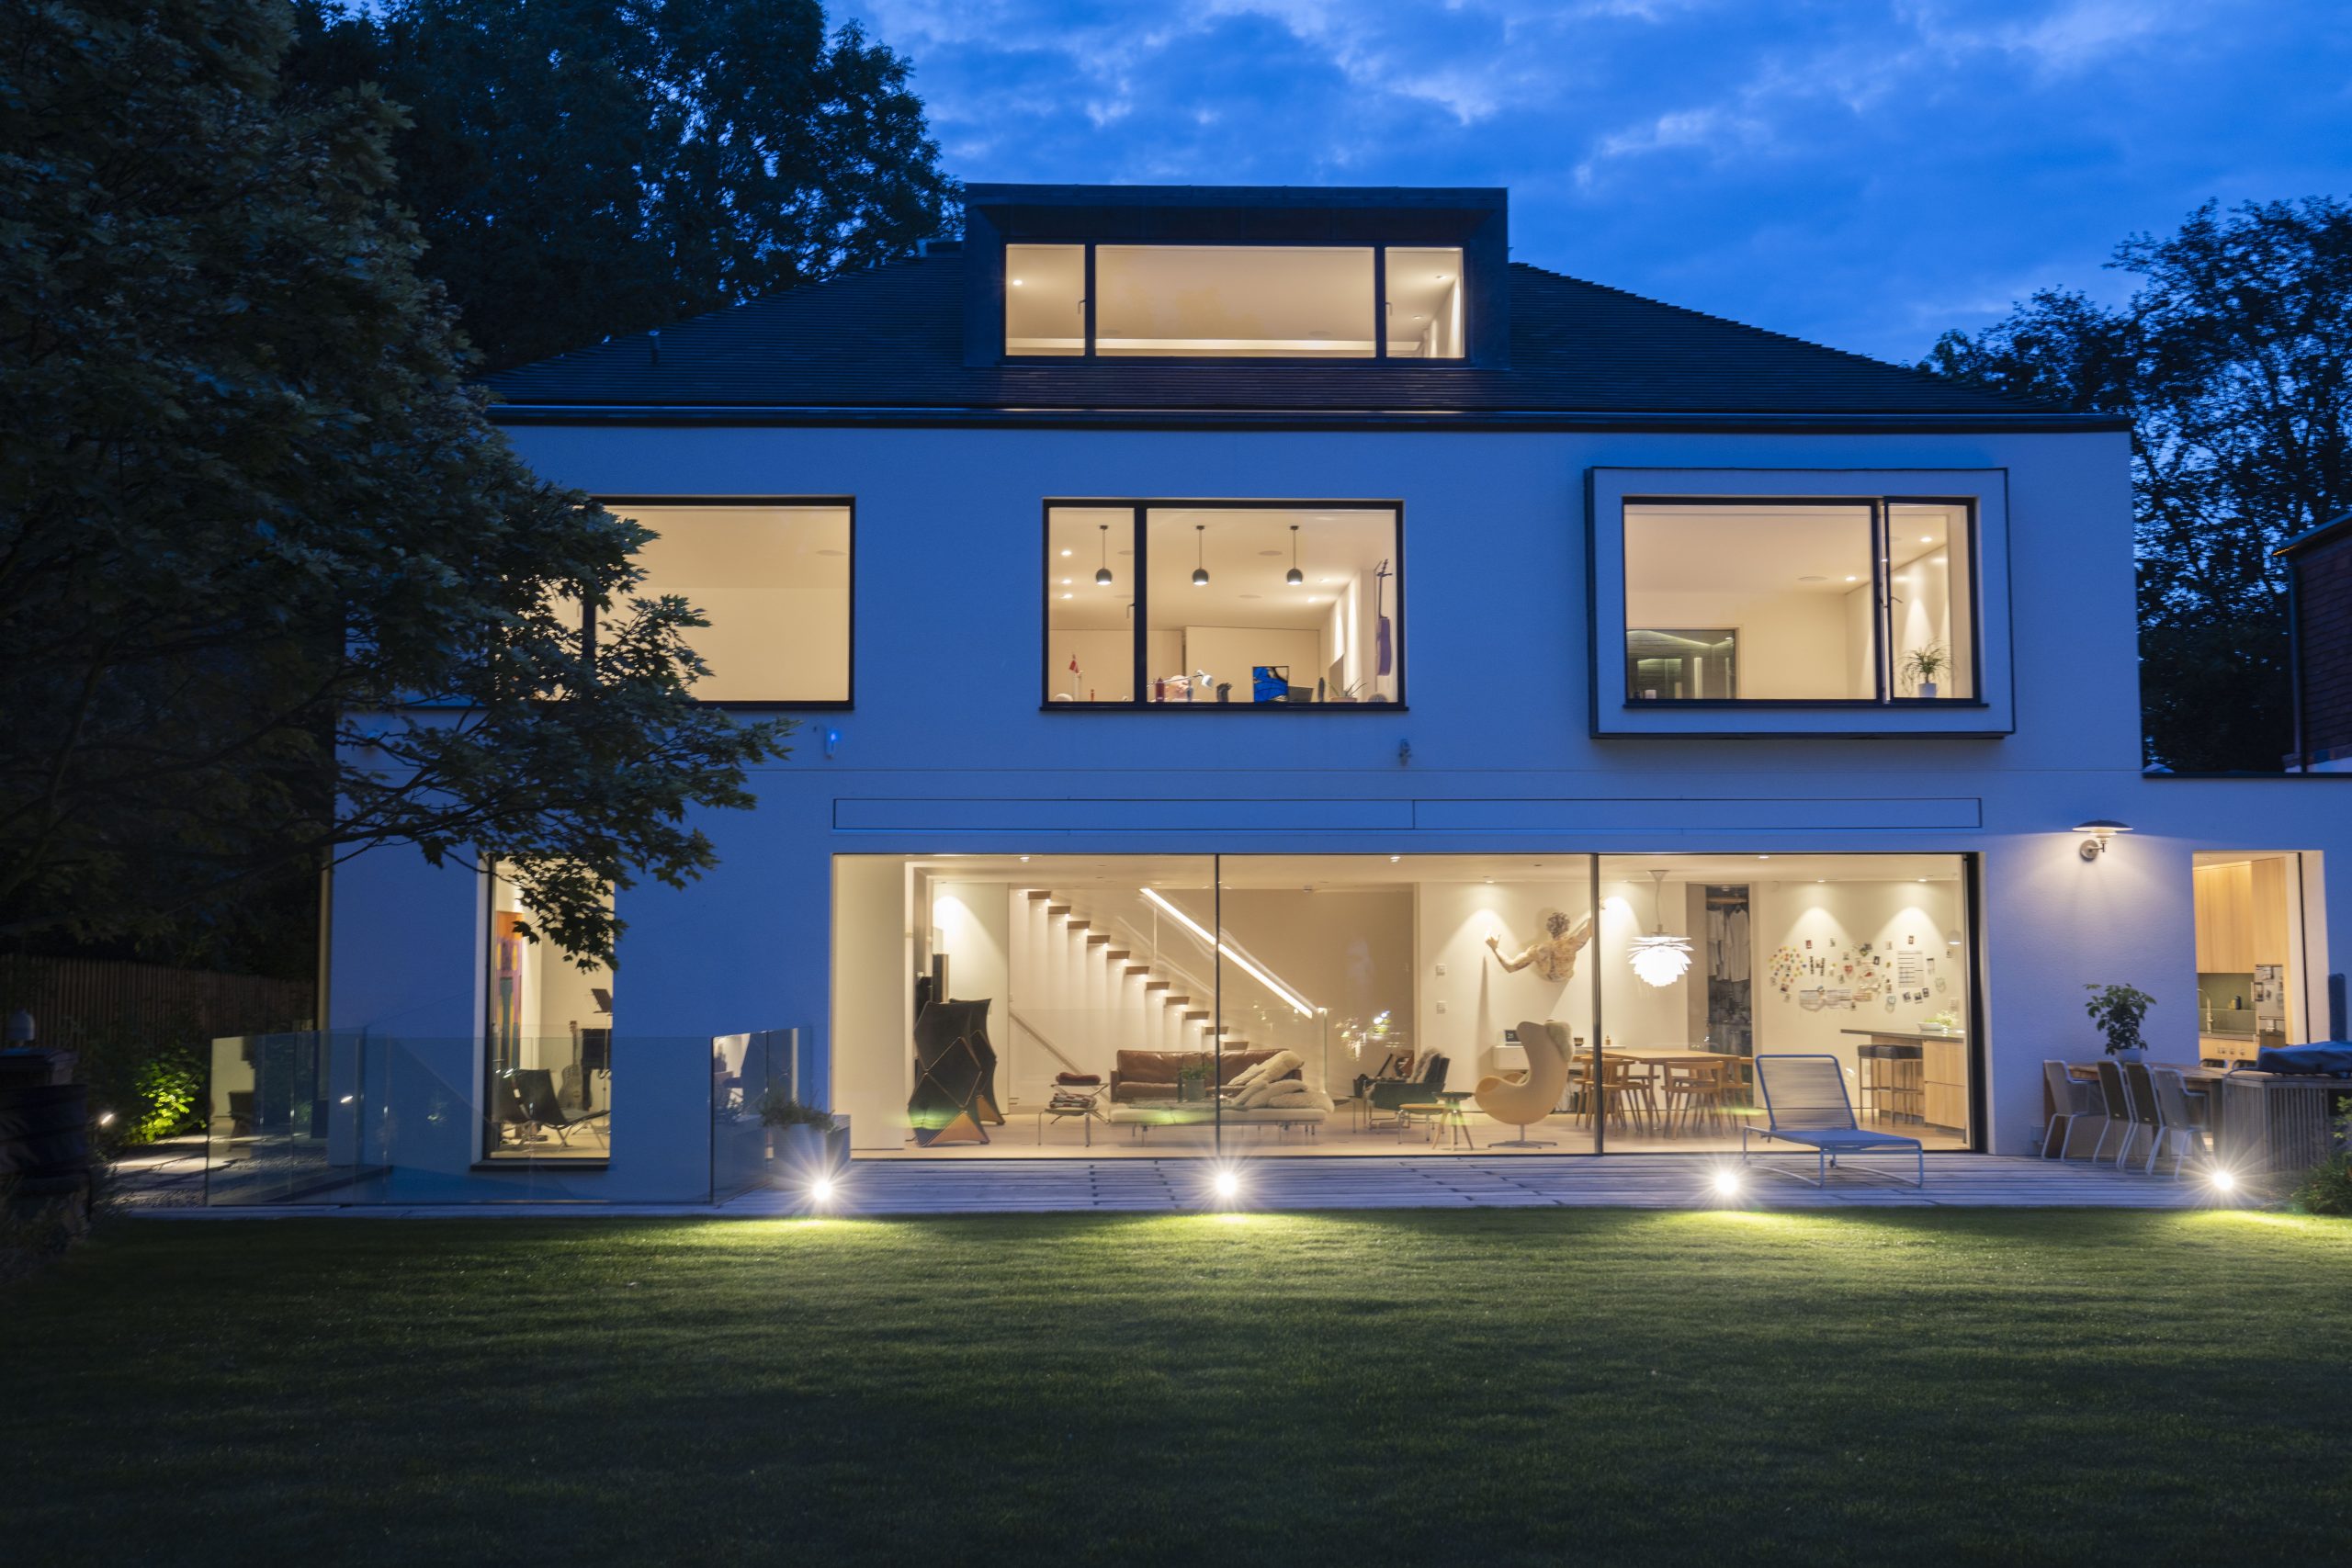 Dulwich Luxury high end property - London Interior Design - Dali lighting - Intelligent home - Energy efficient home